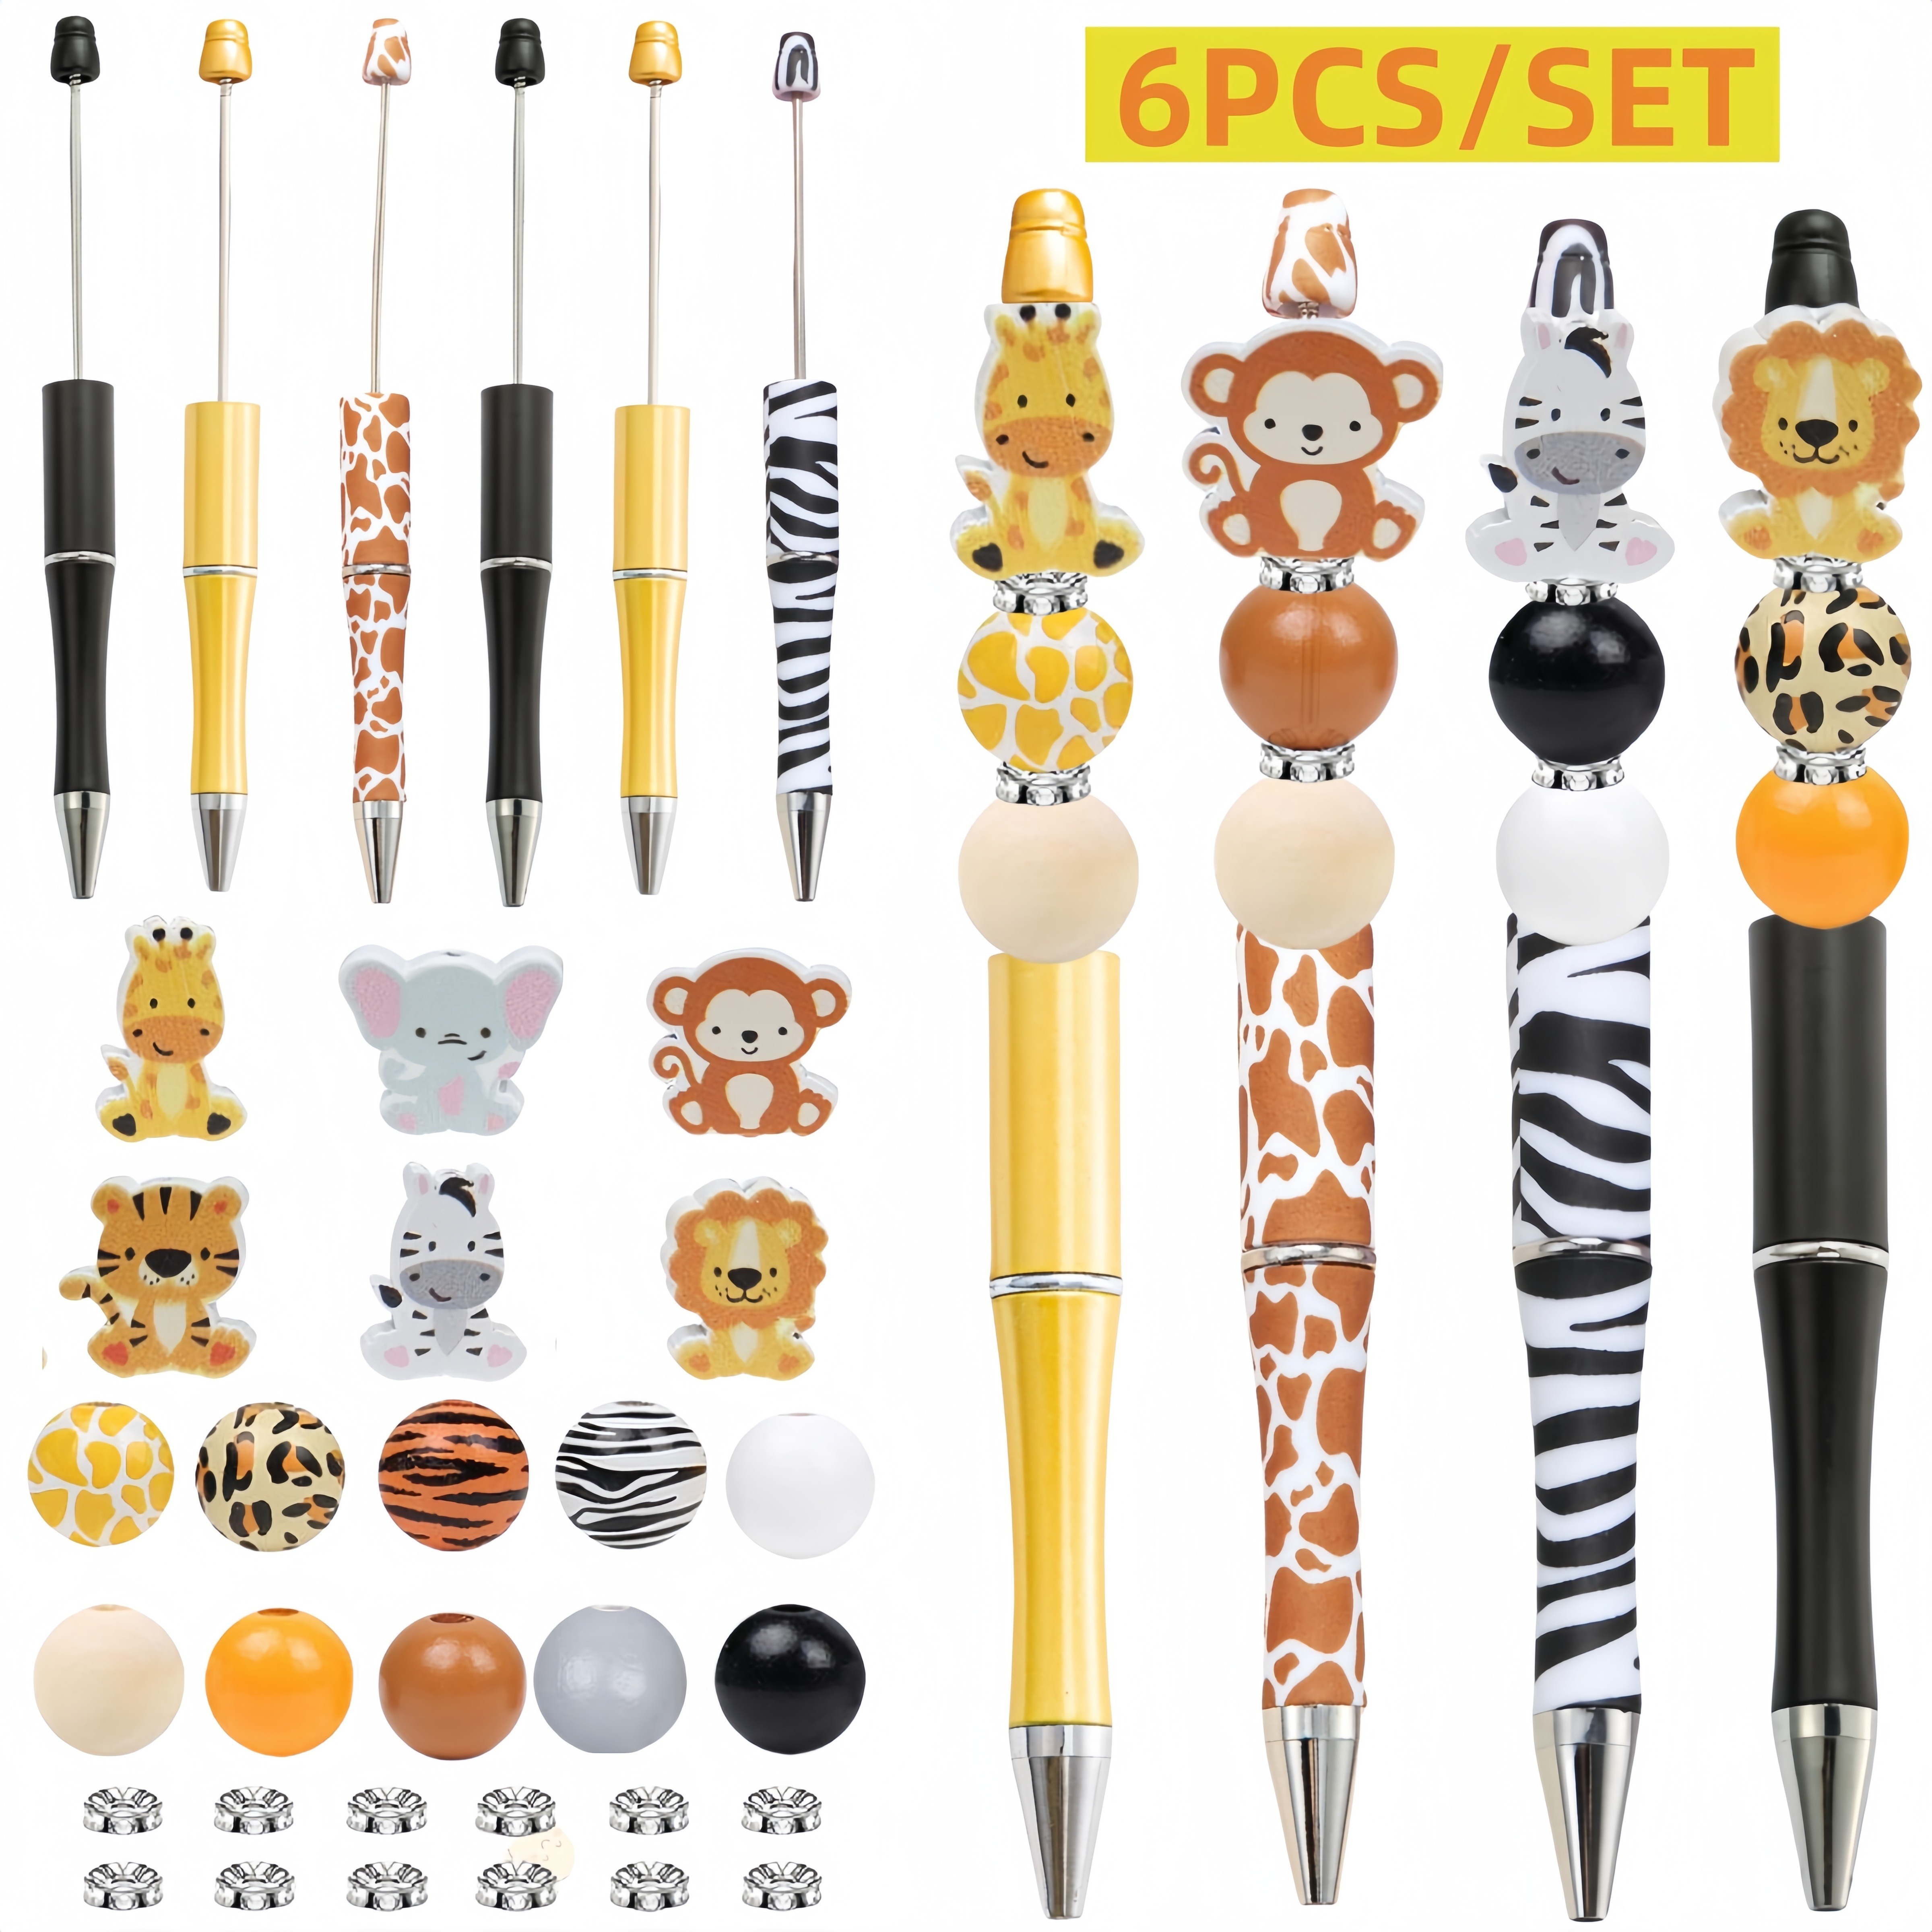 

6-piece Animal-themed Ballpoint Pen Set With Jungle Safari Beads, Tiger, Lion, Zebra, Giraffe, Elephant, Monkey Charms, Plastic Material, Ideal For Office, School, Gifting - Suitable For Ages 18+